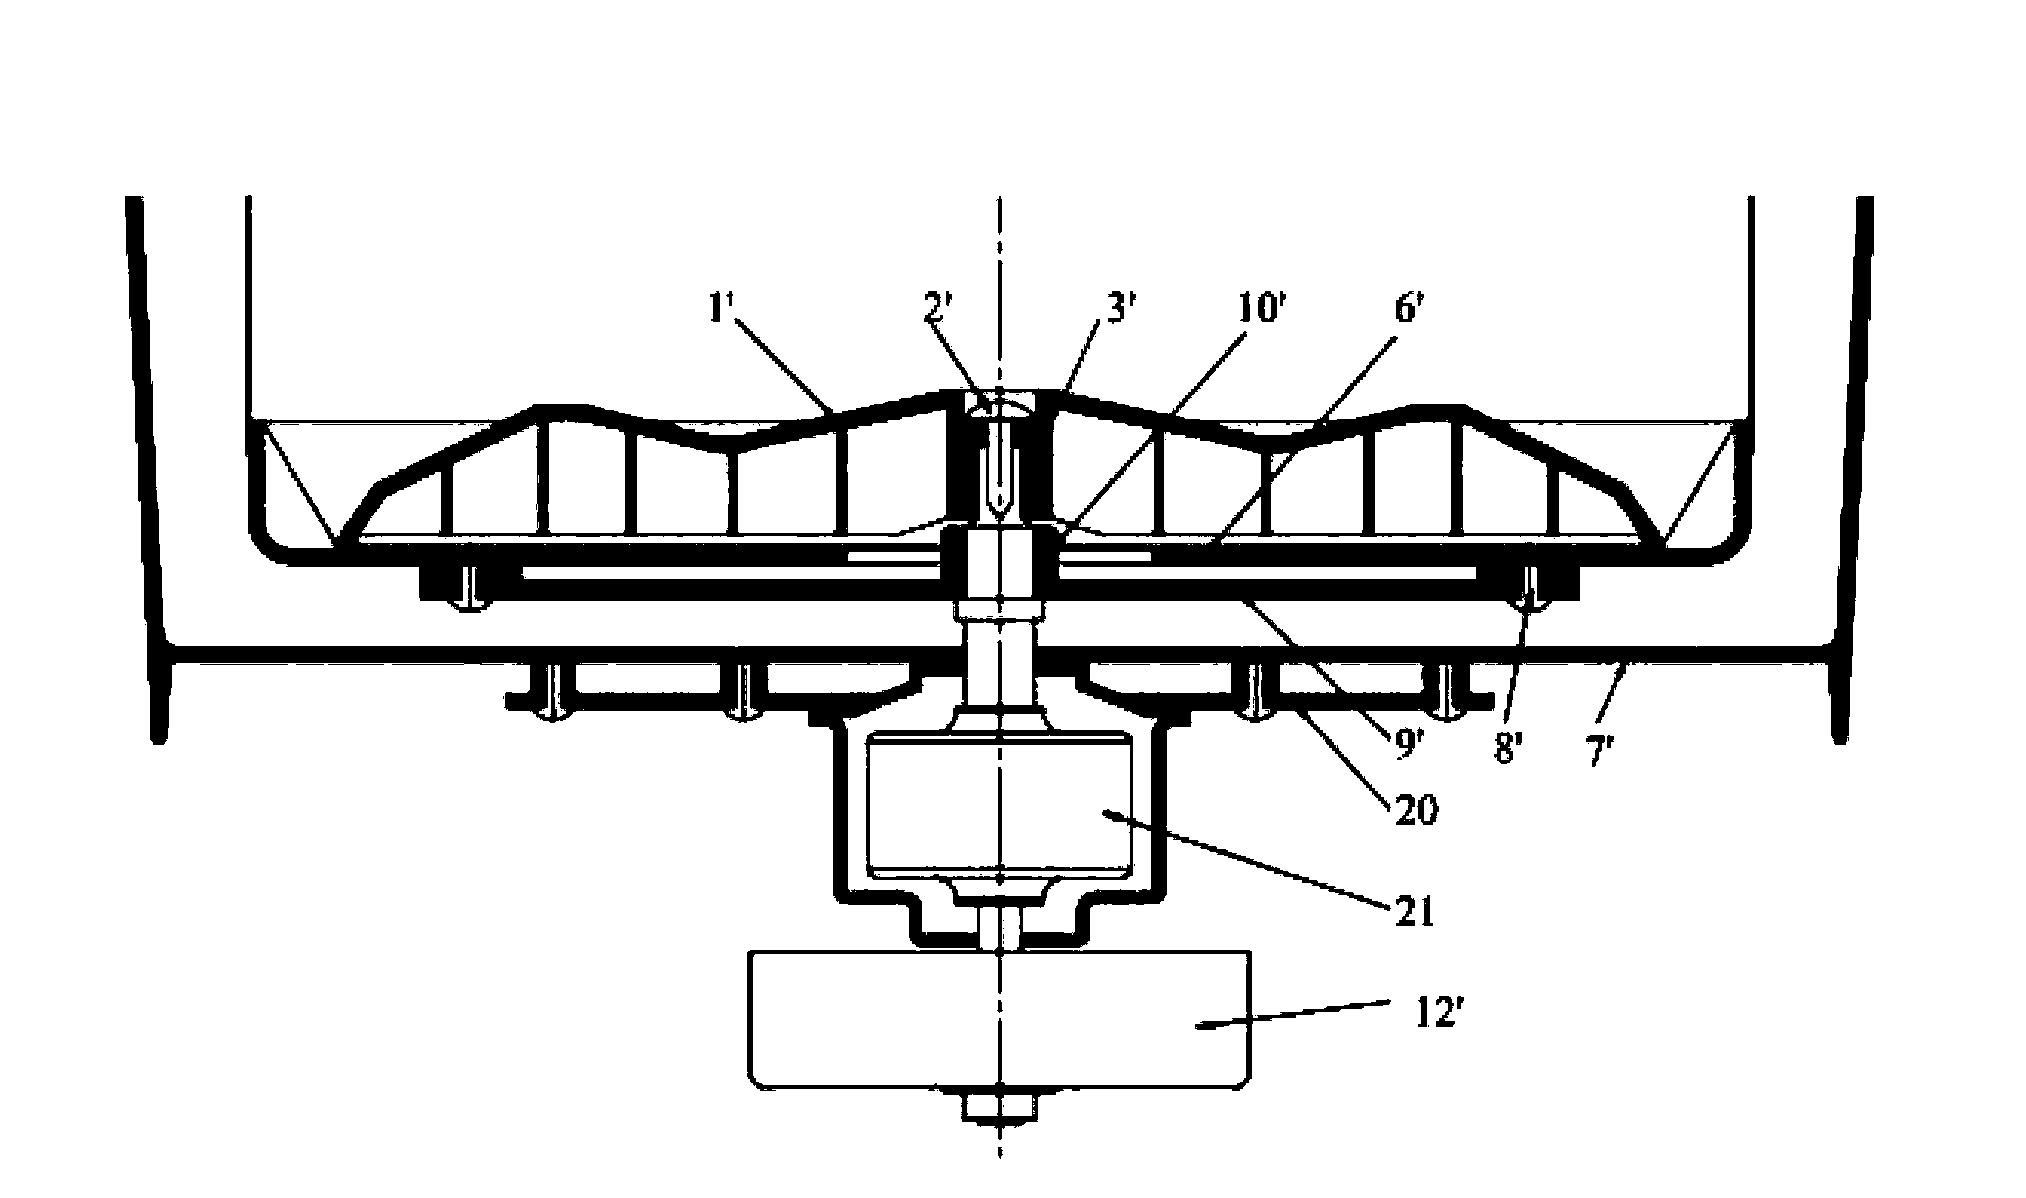 Transmission structure of fully-automatic impeller washing machine